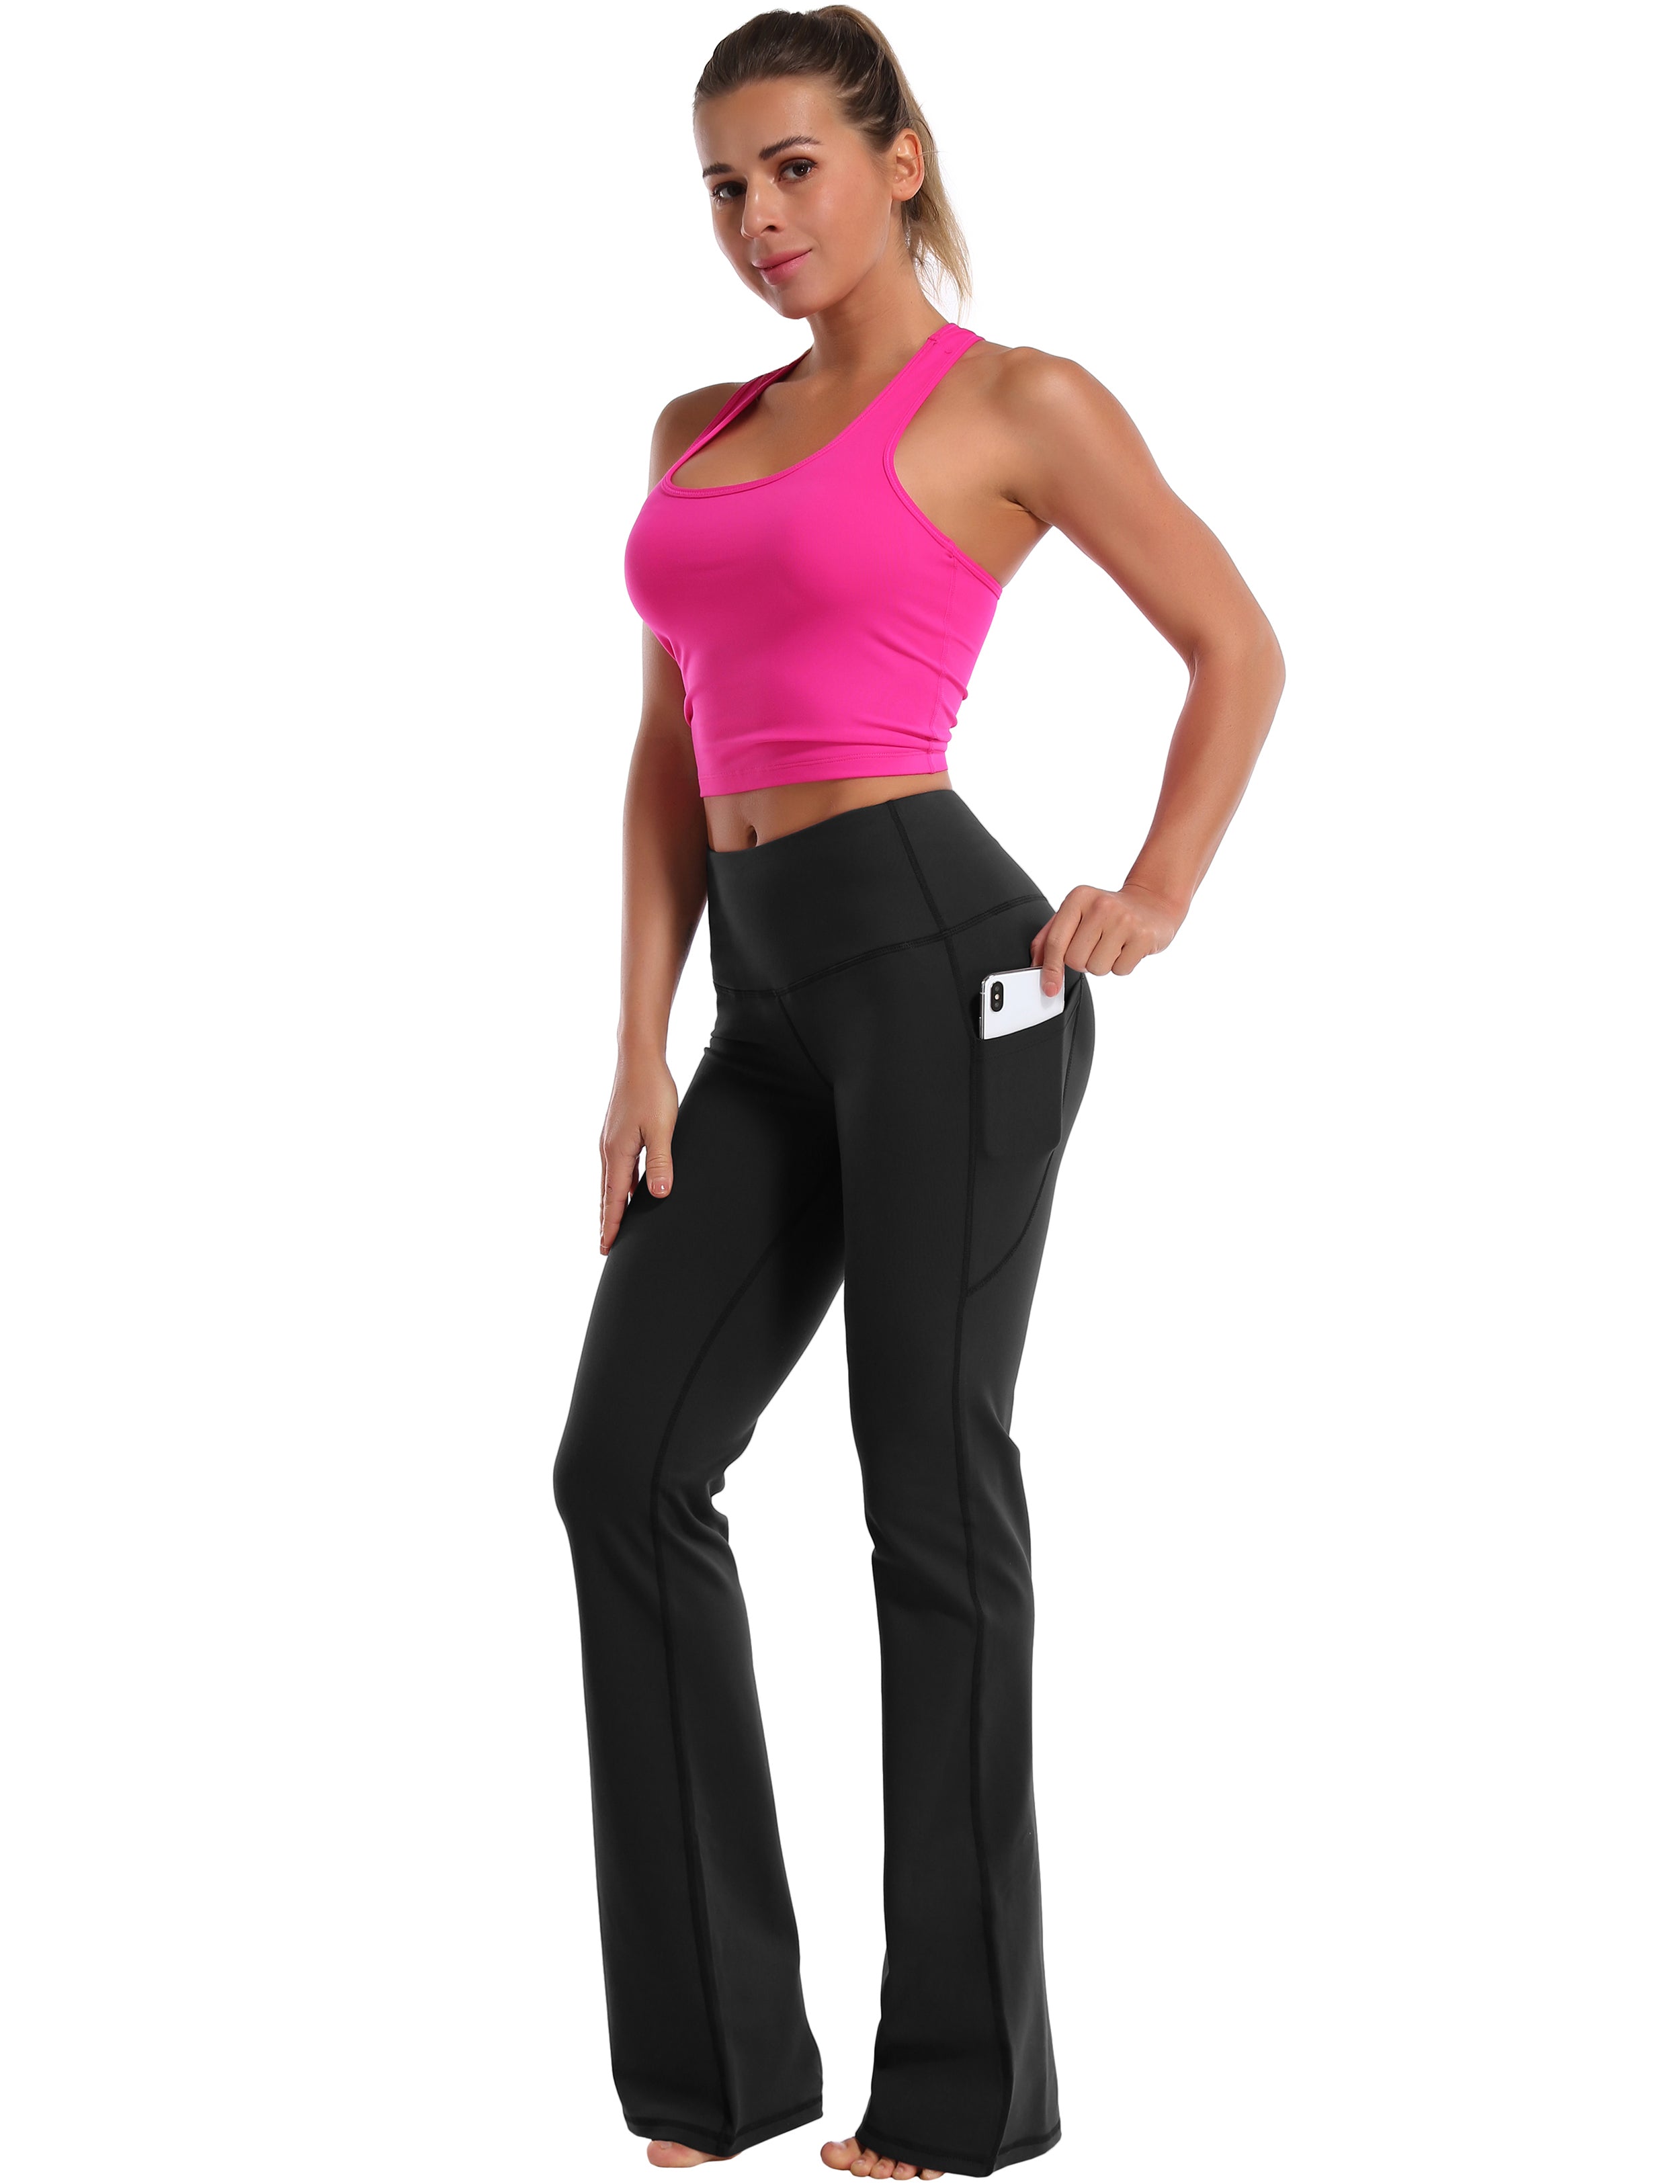 139 Side Pockets Bootcut Leggings black 87%Nylon/13%Spandex Fabric doesn't attract lint easily 4-way stretch No see-through Moisture-wicking Tummy control Inner pocket Four lengths